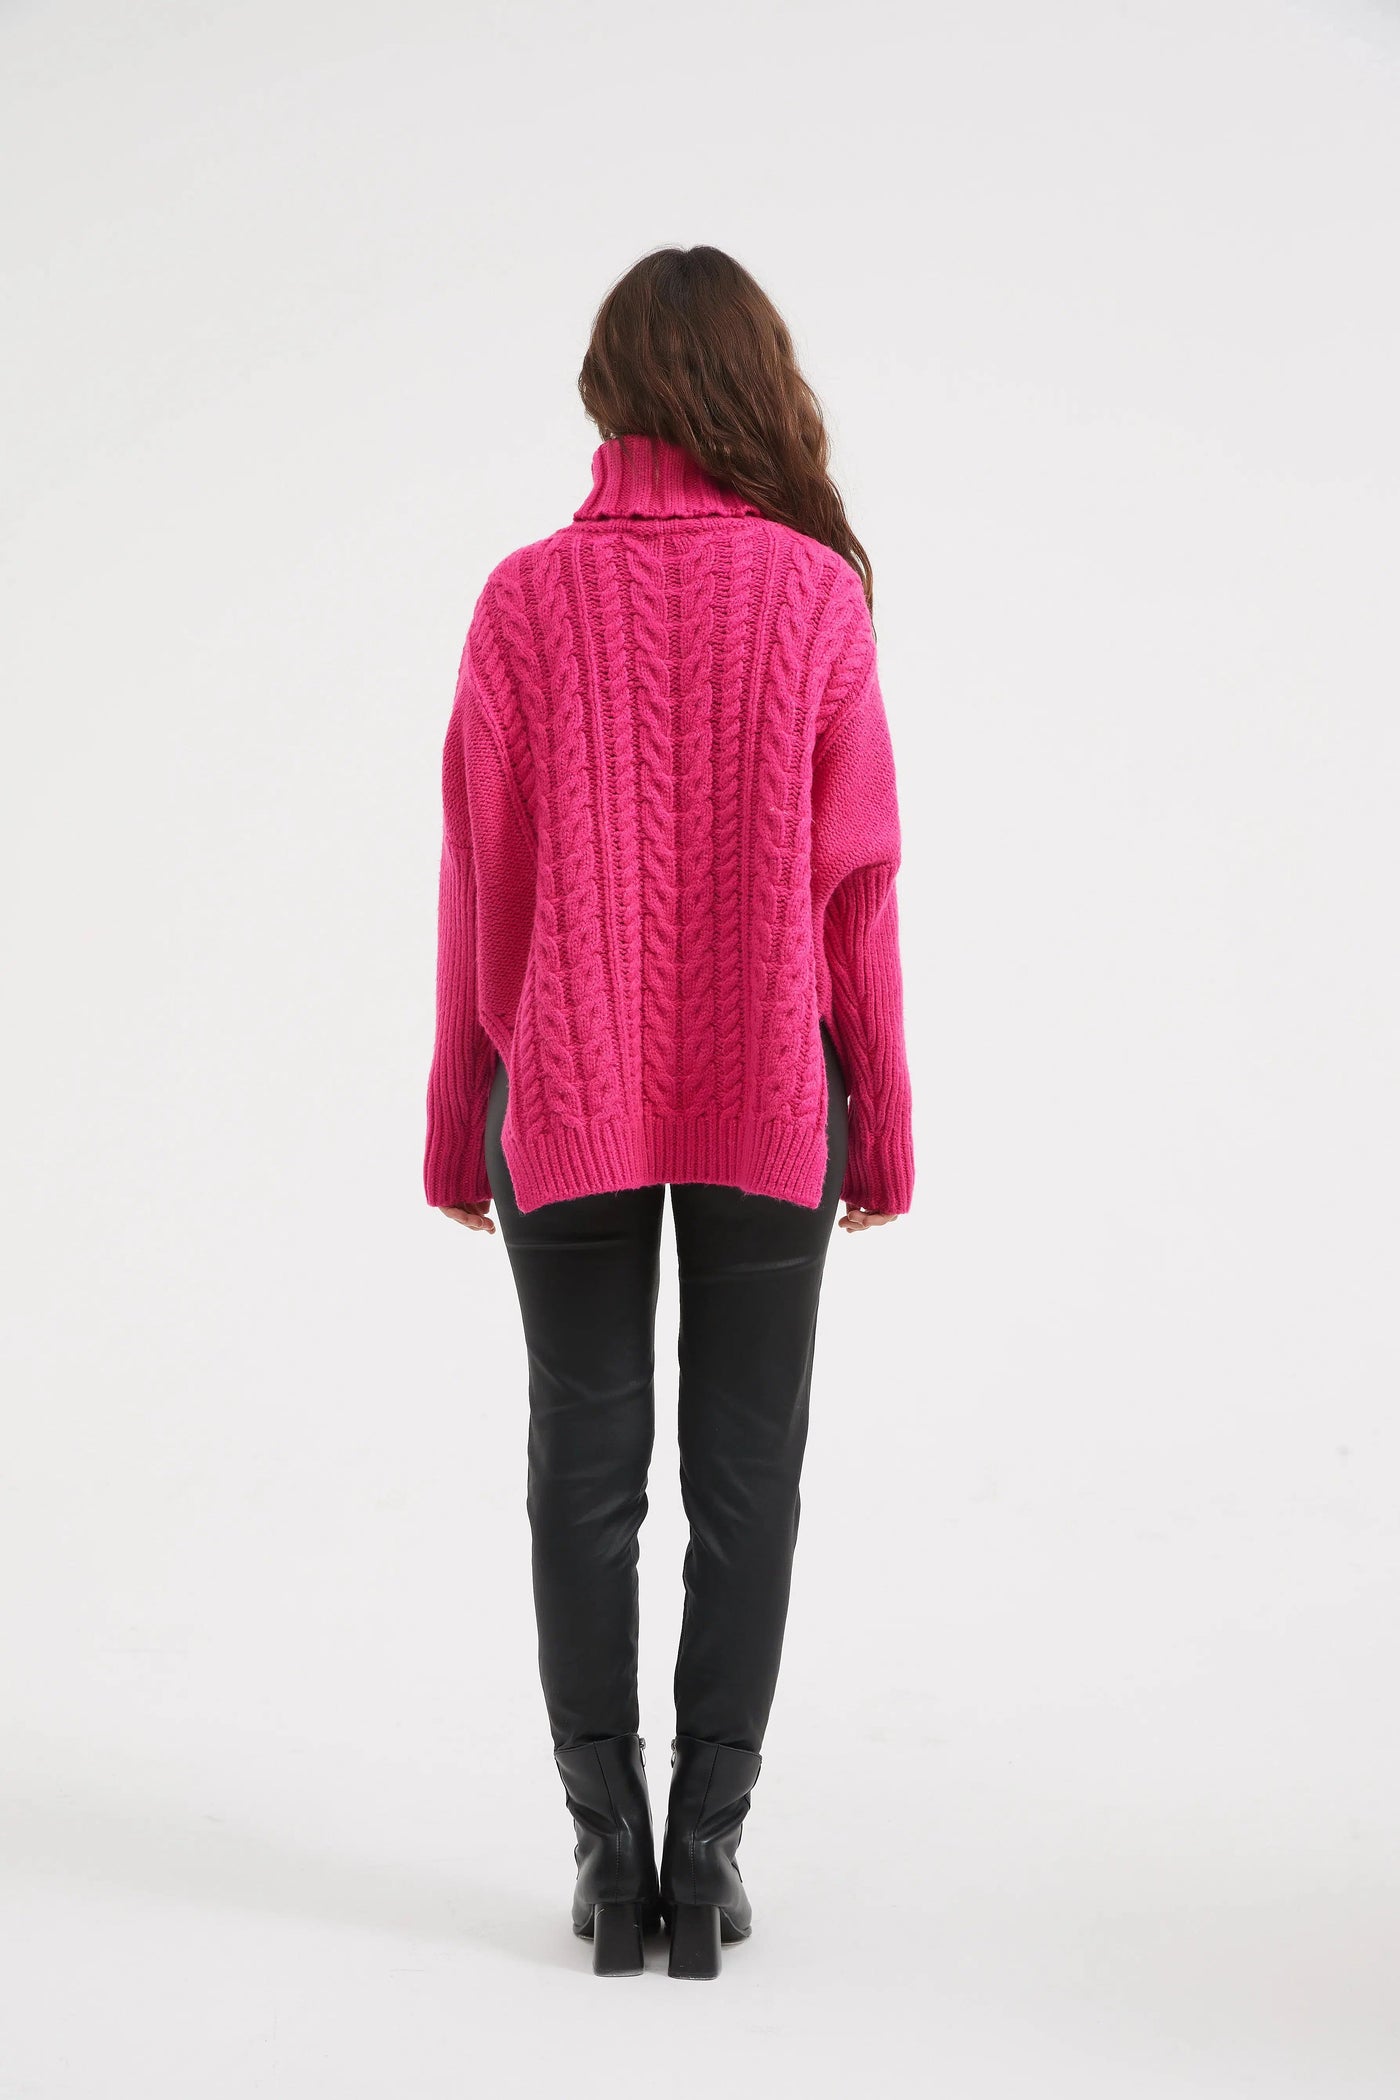 High Neck Cable Knit - Hot Pink-Tirelli-Lima & Co